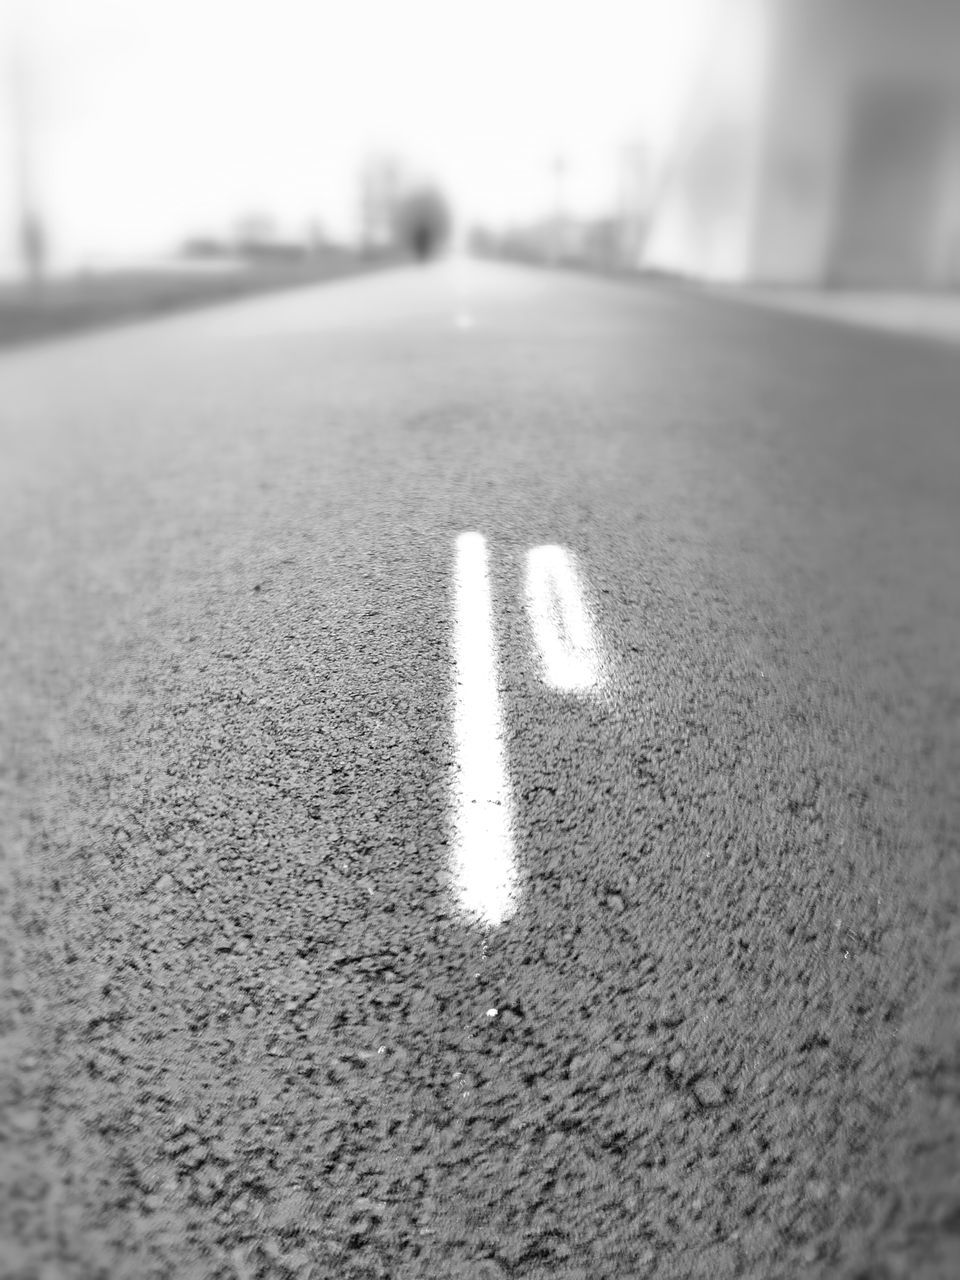 road marking, road, asphalt, transportation, close-up, the way forward, guidance, communication, diminishing perspective, selective focus, surface level, street, text, focus on foreground, direction, vanishing point, arrow symbol, day, western script, no people